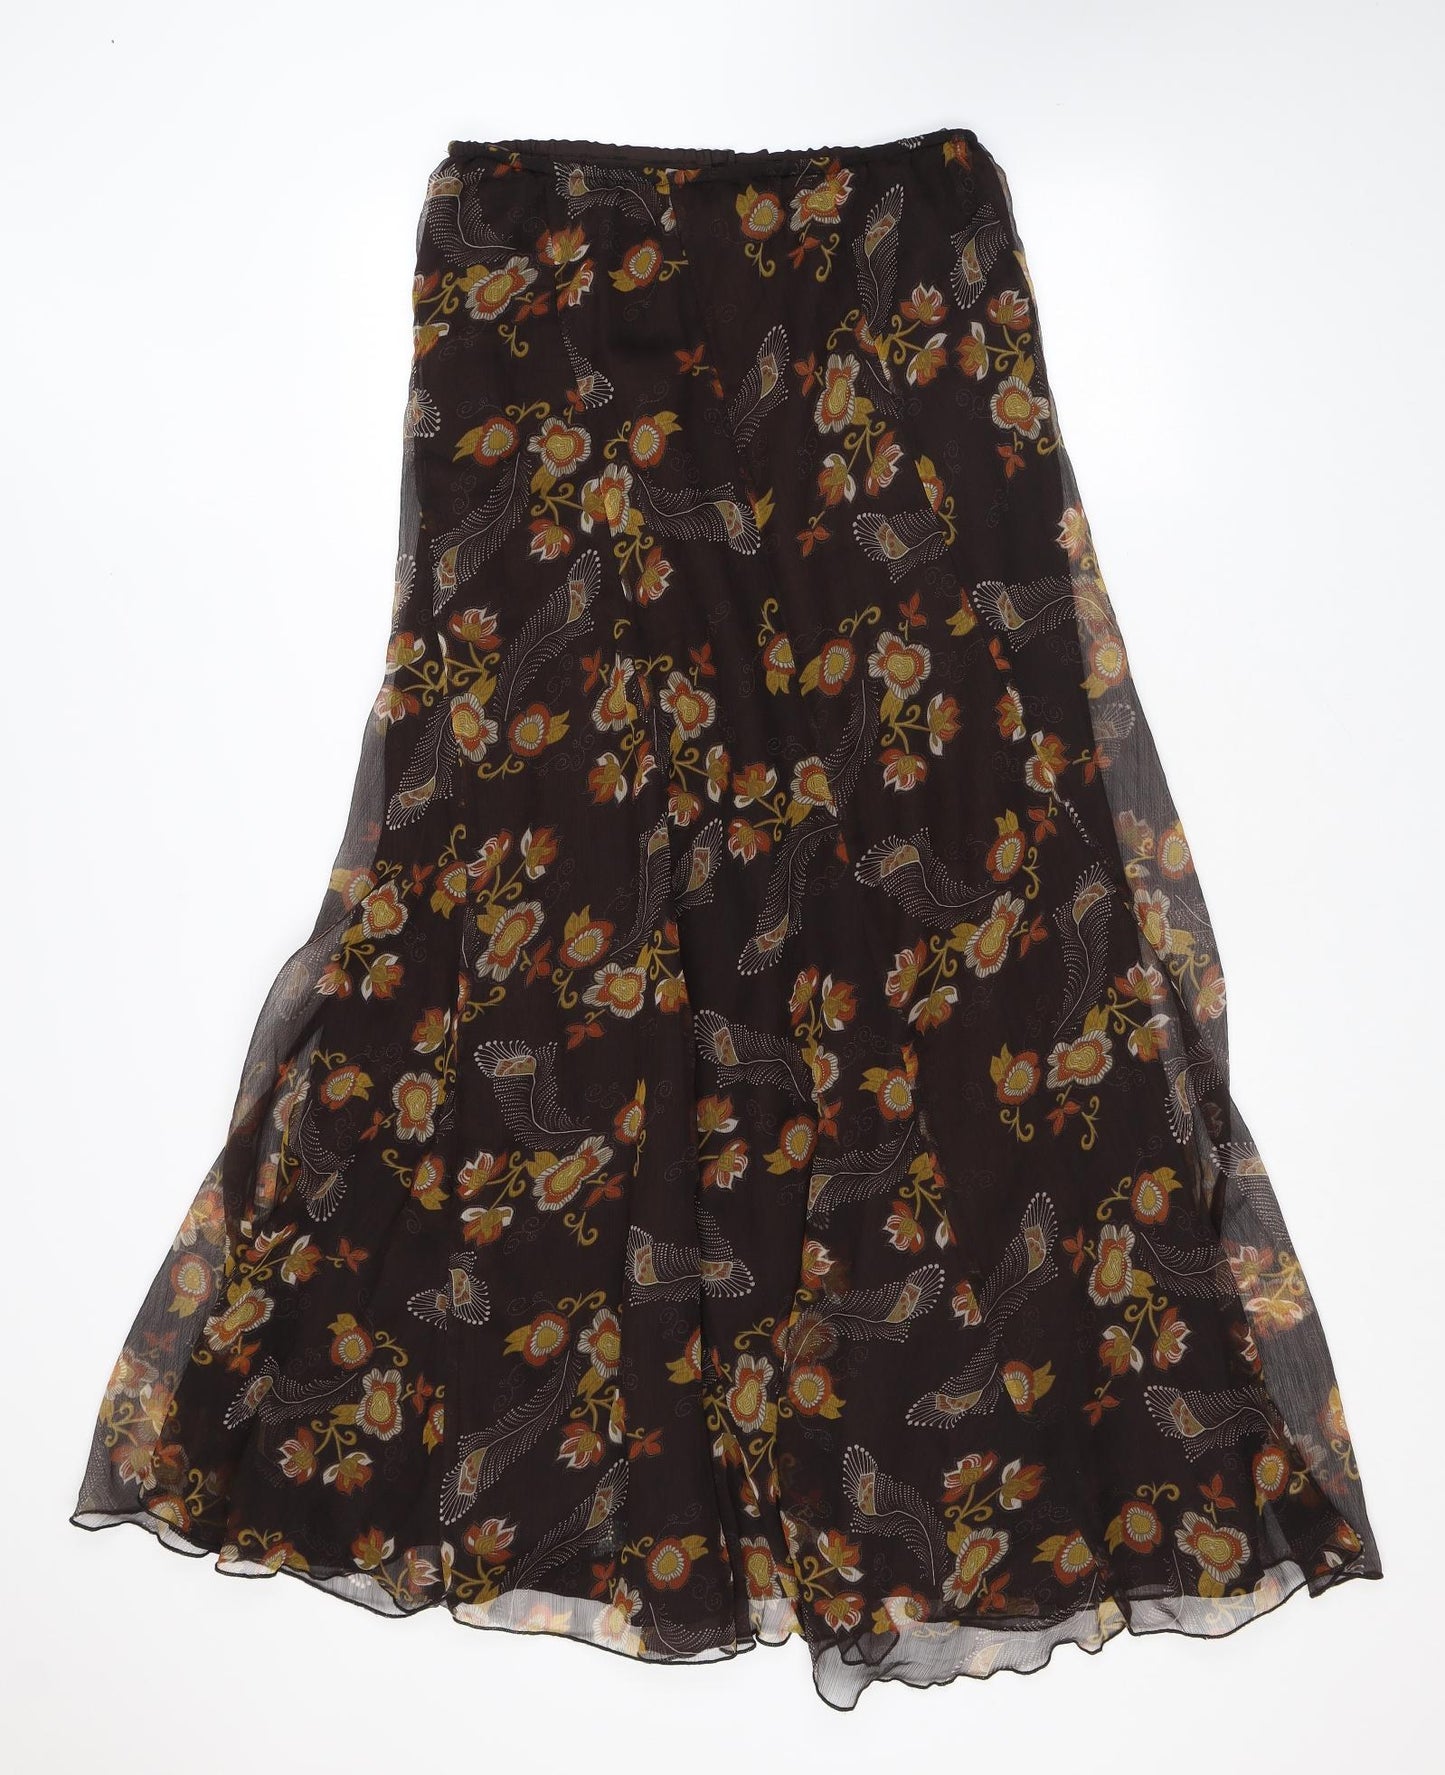 Long Tall Sally Womens Brown Floral Polyester Swing Skirt Size 12